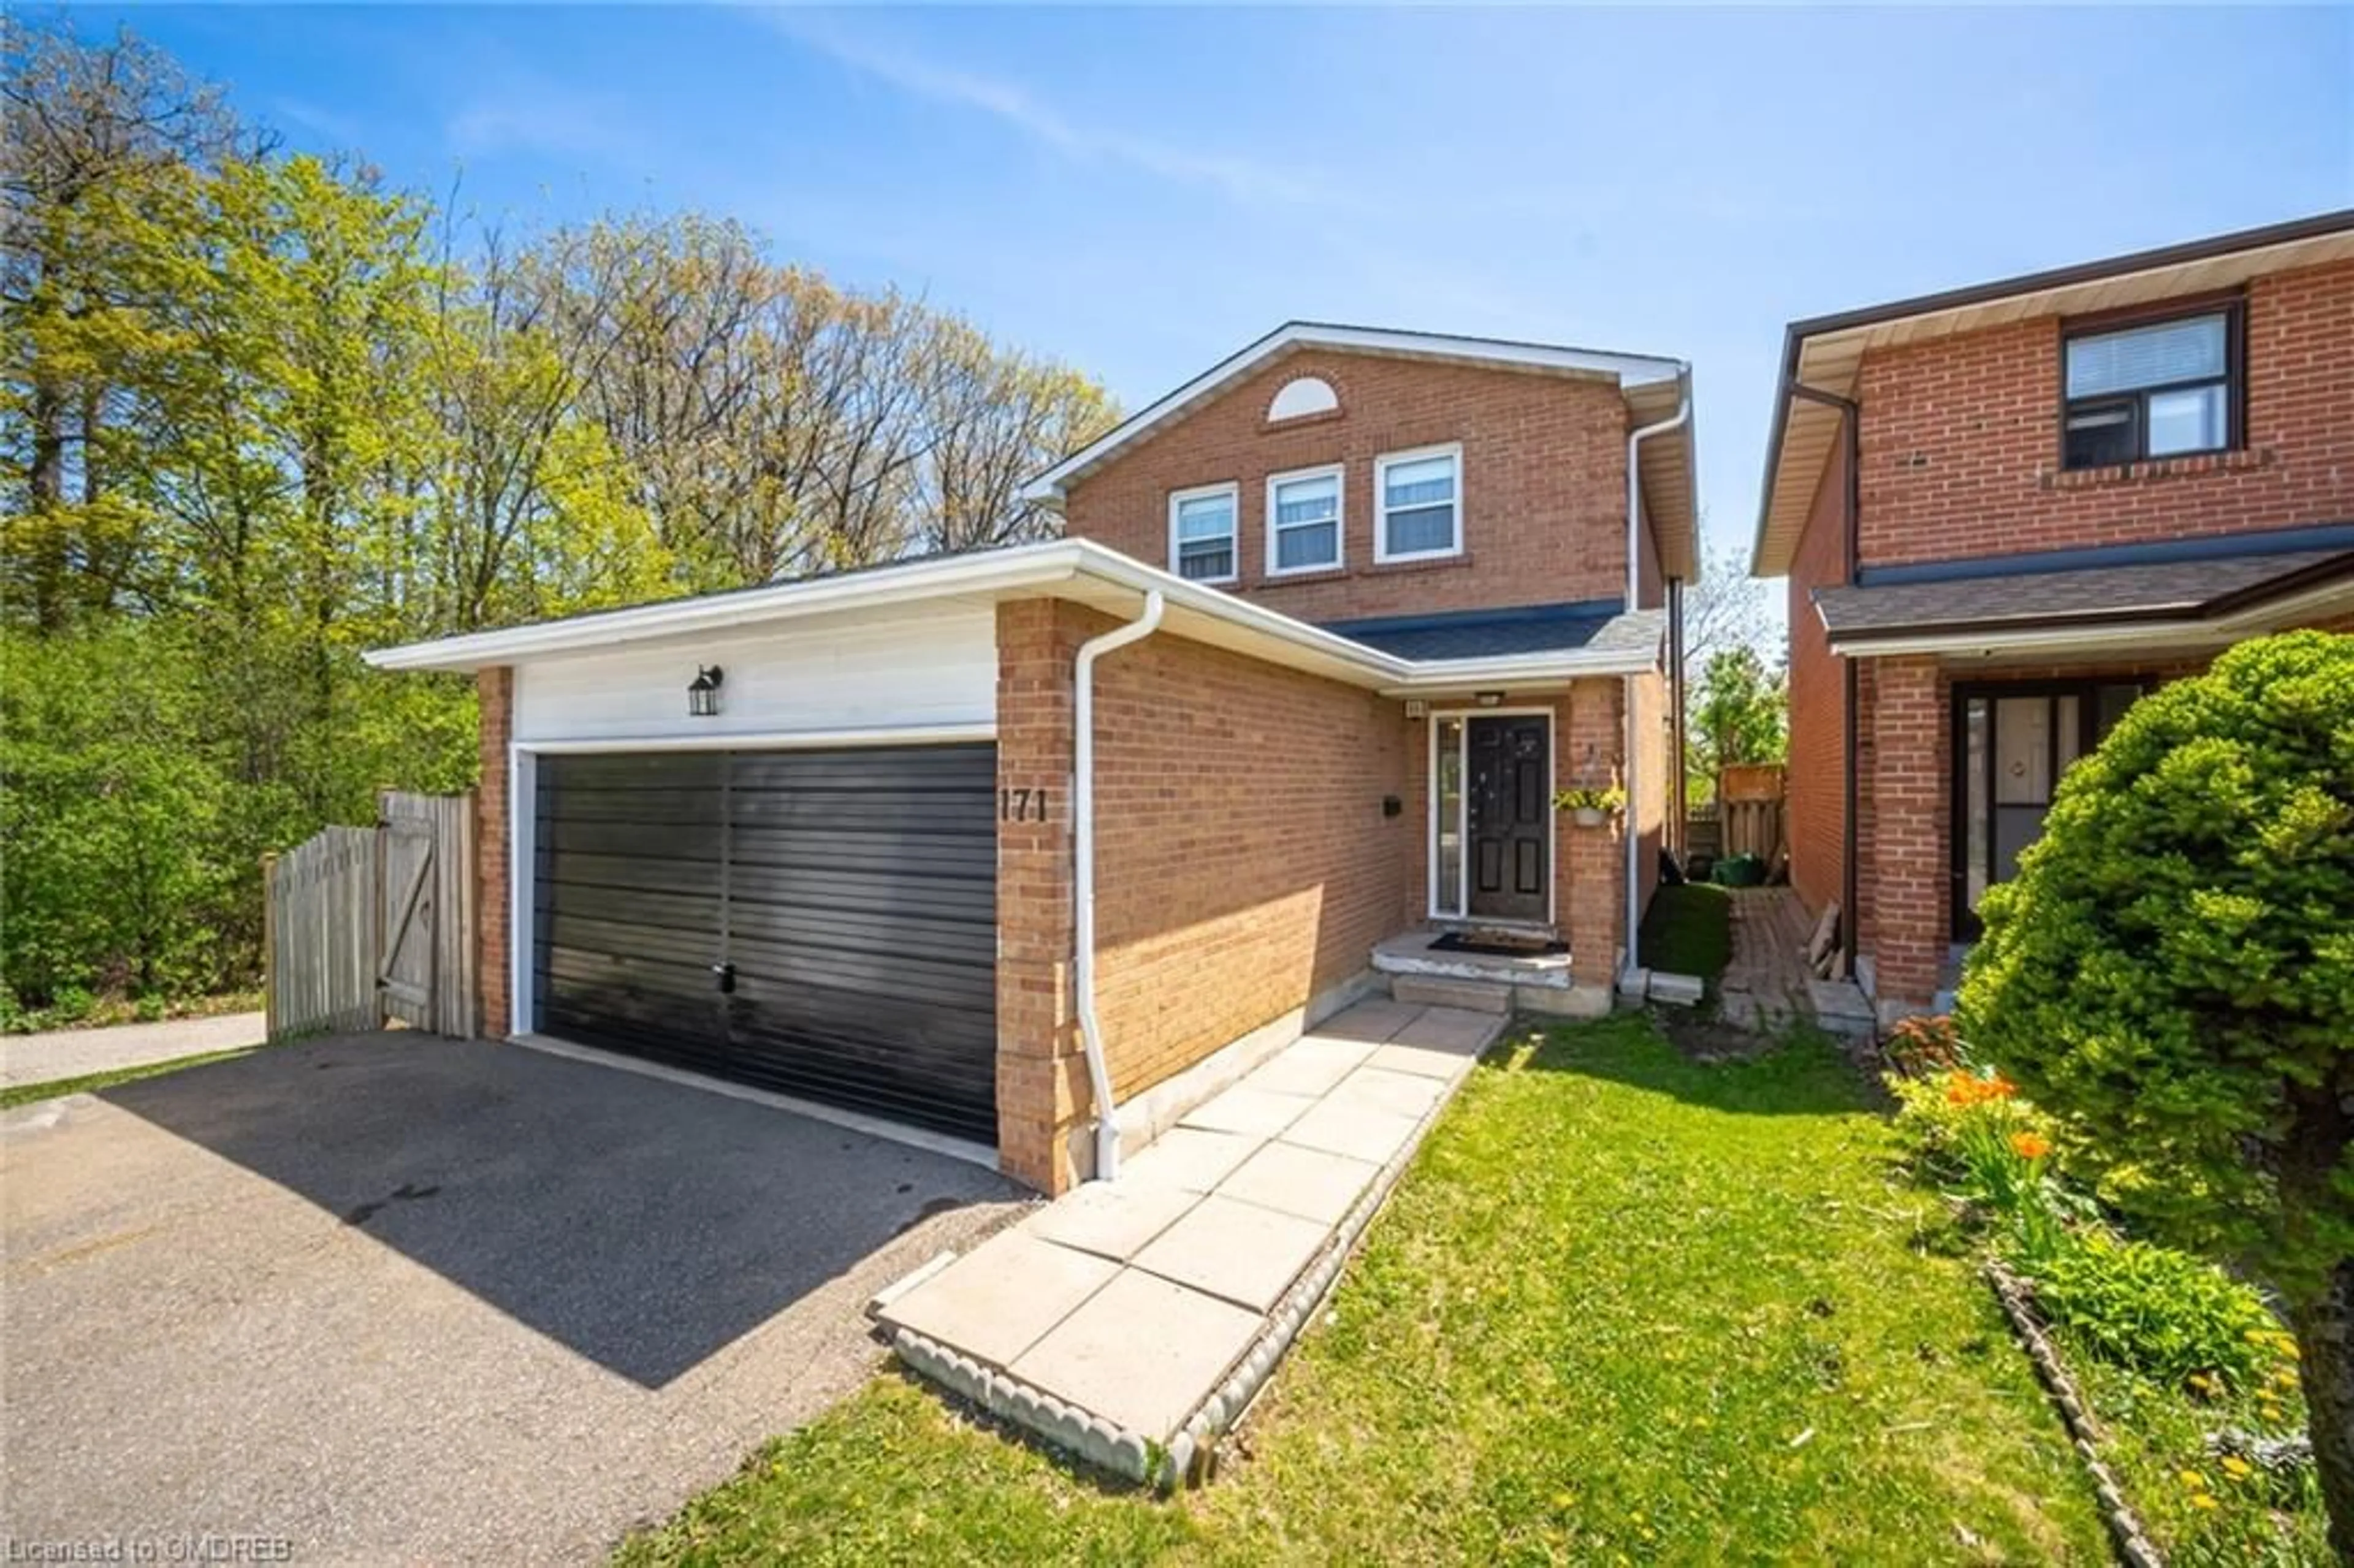 Home with brick exterior material for 171 Simmons Blvd, Brampton Ontario L6V 3Y2